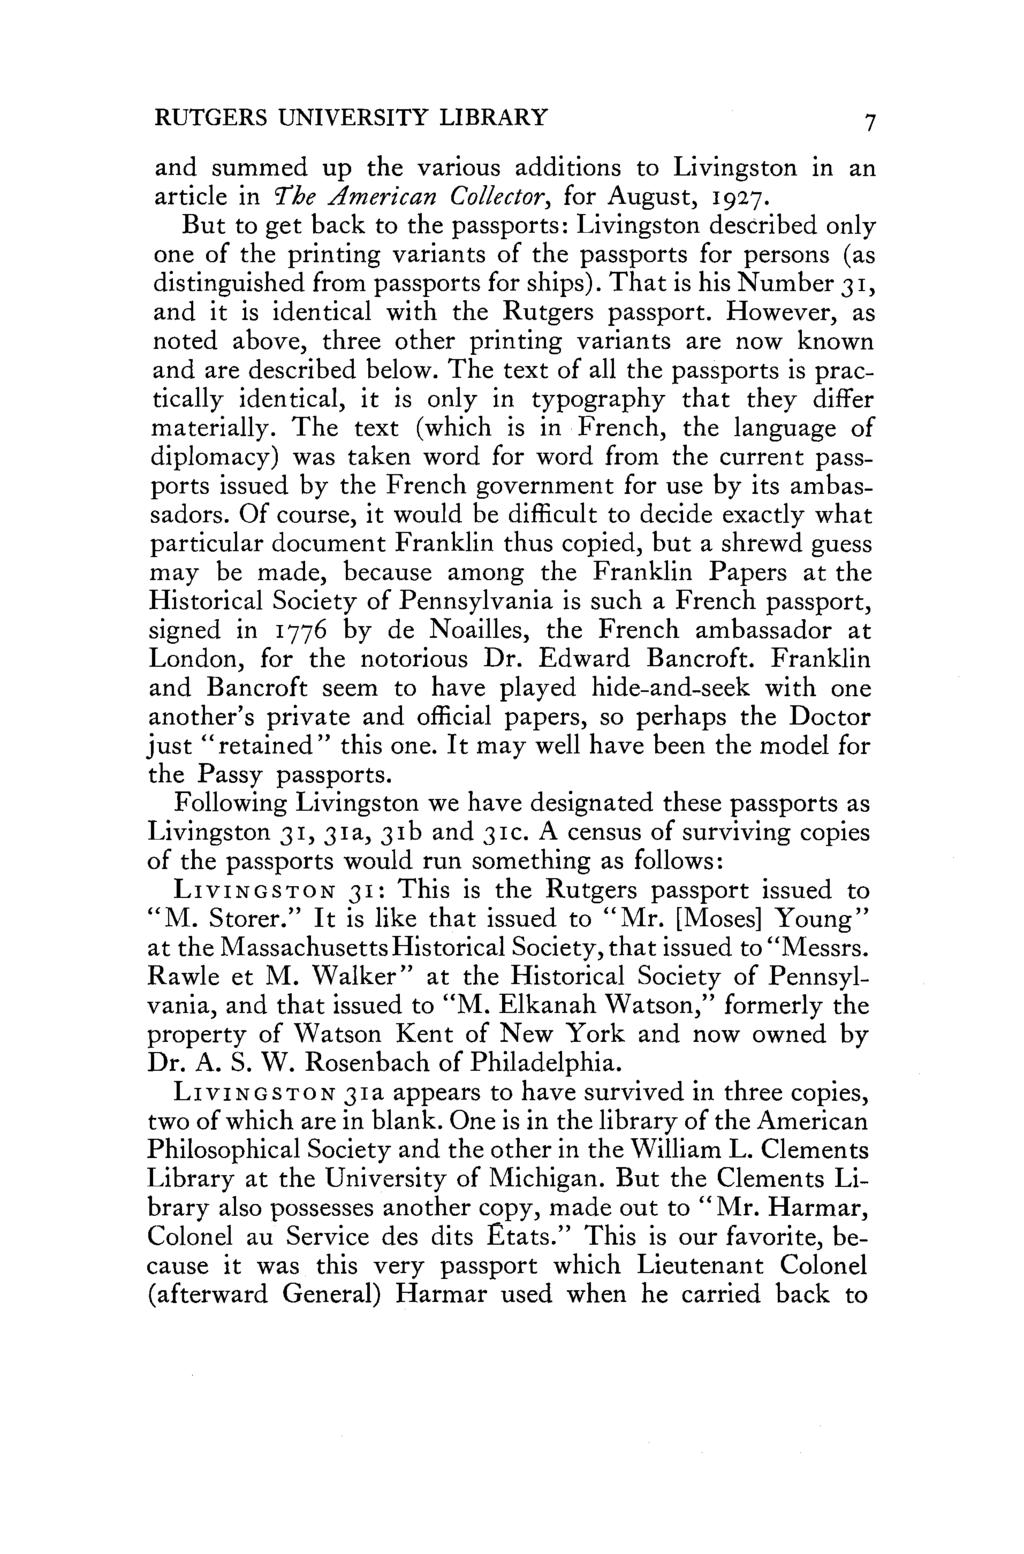 7 RUTGERS UNIVERSITY LIBRARY and summed up the various additions to Livingston in an article in The American Collector, for August, 1927.